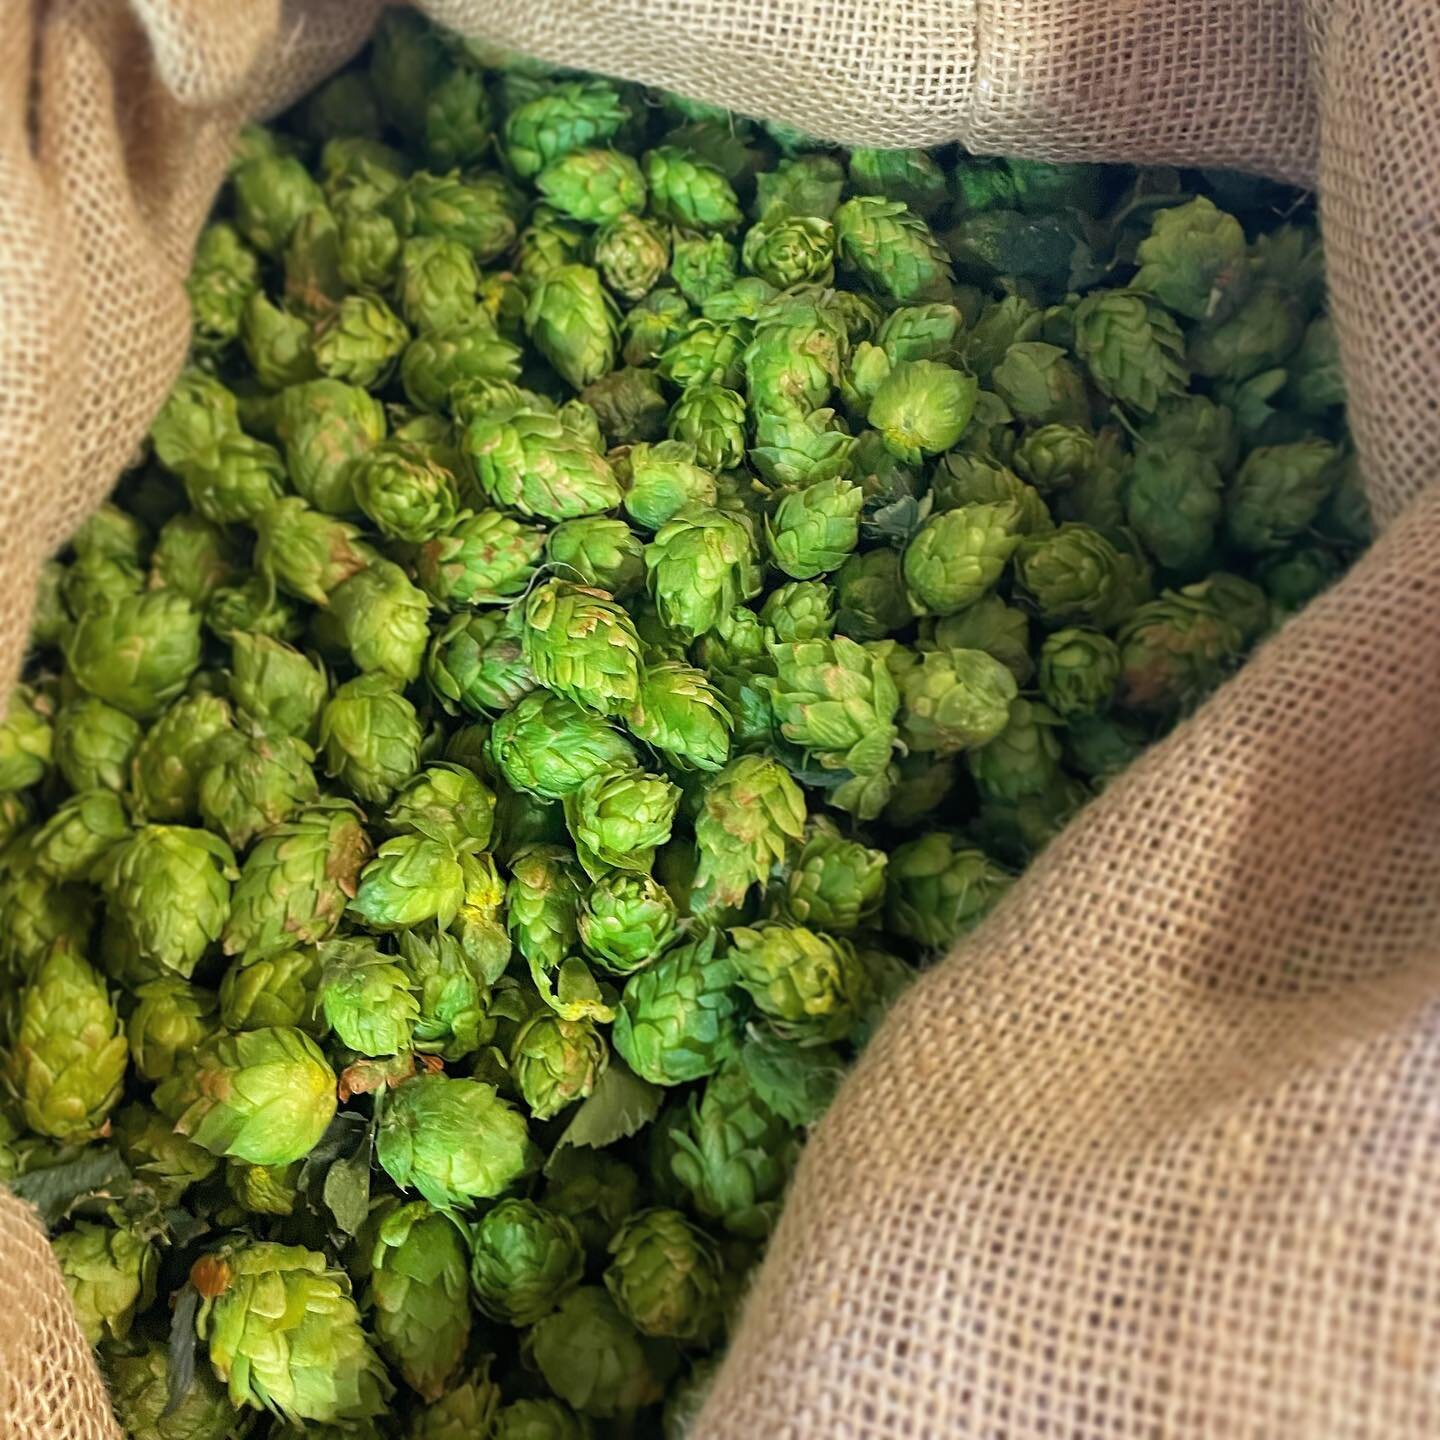 Today we are brewing a fresh hop pilsner with hops from @billygoathopfarm in Montrose. (winners of the Cascade Cup).
🍺 Keep an eye out for this tasty treat in the coming weeks!

#stormpeakbrewing #steamboatsprings #colorado #craftbeer #colorado #fre